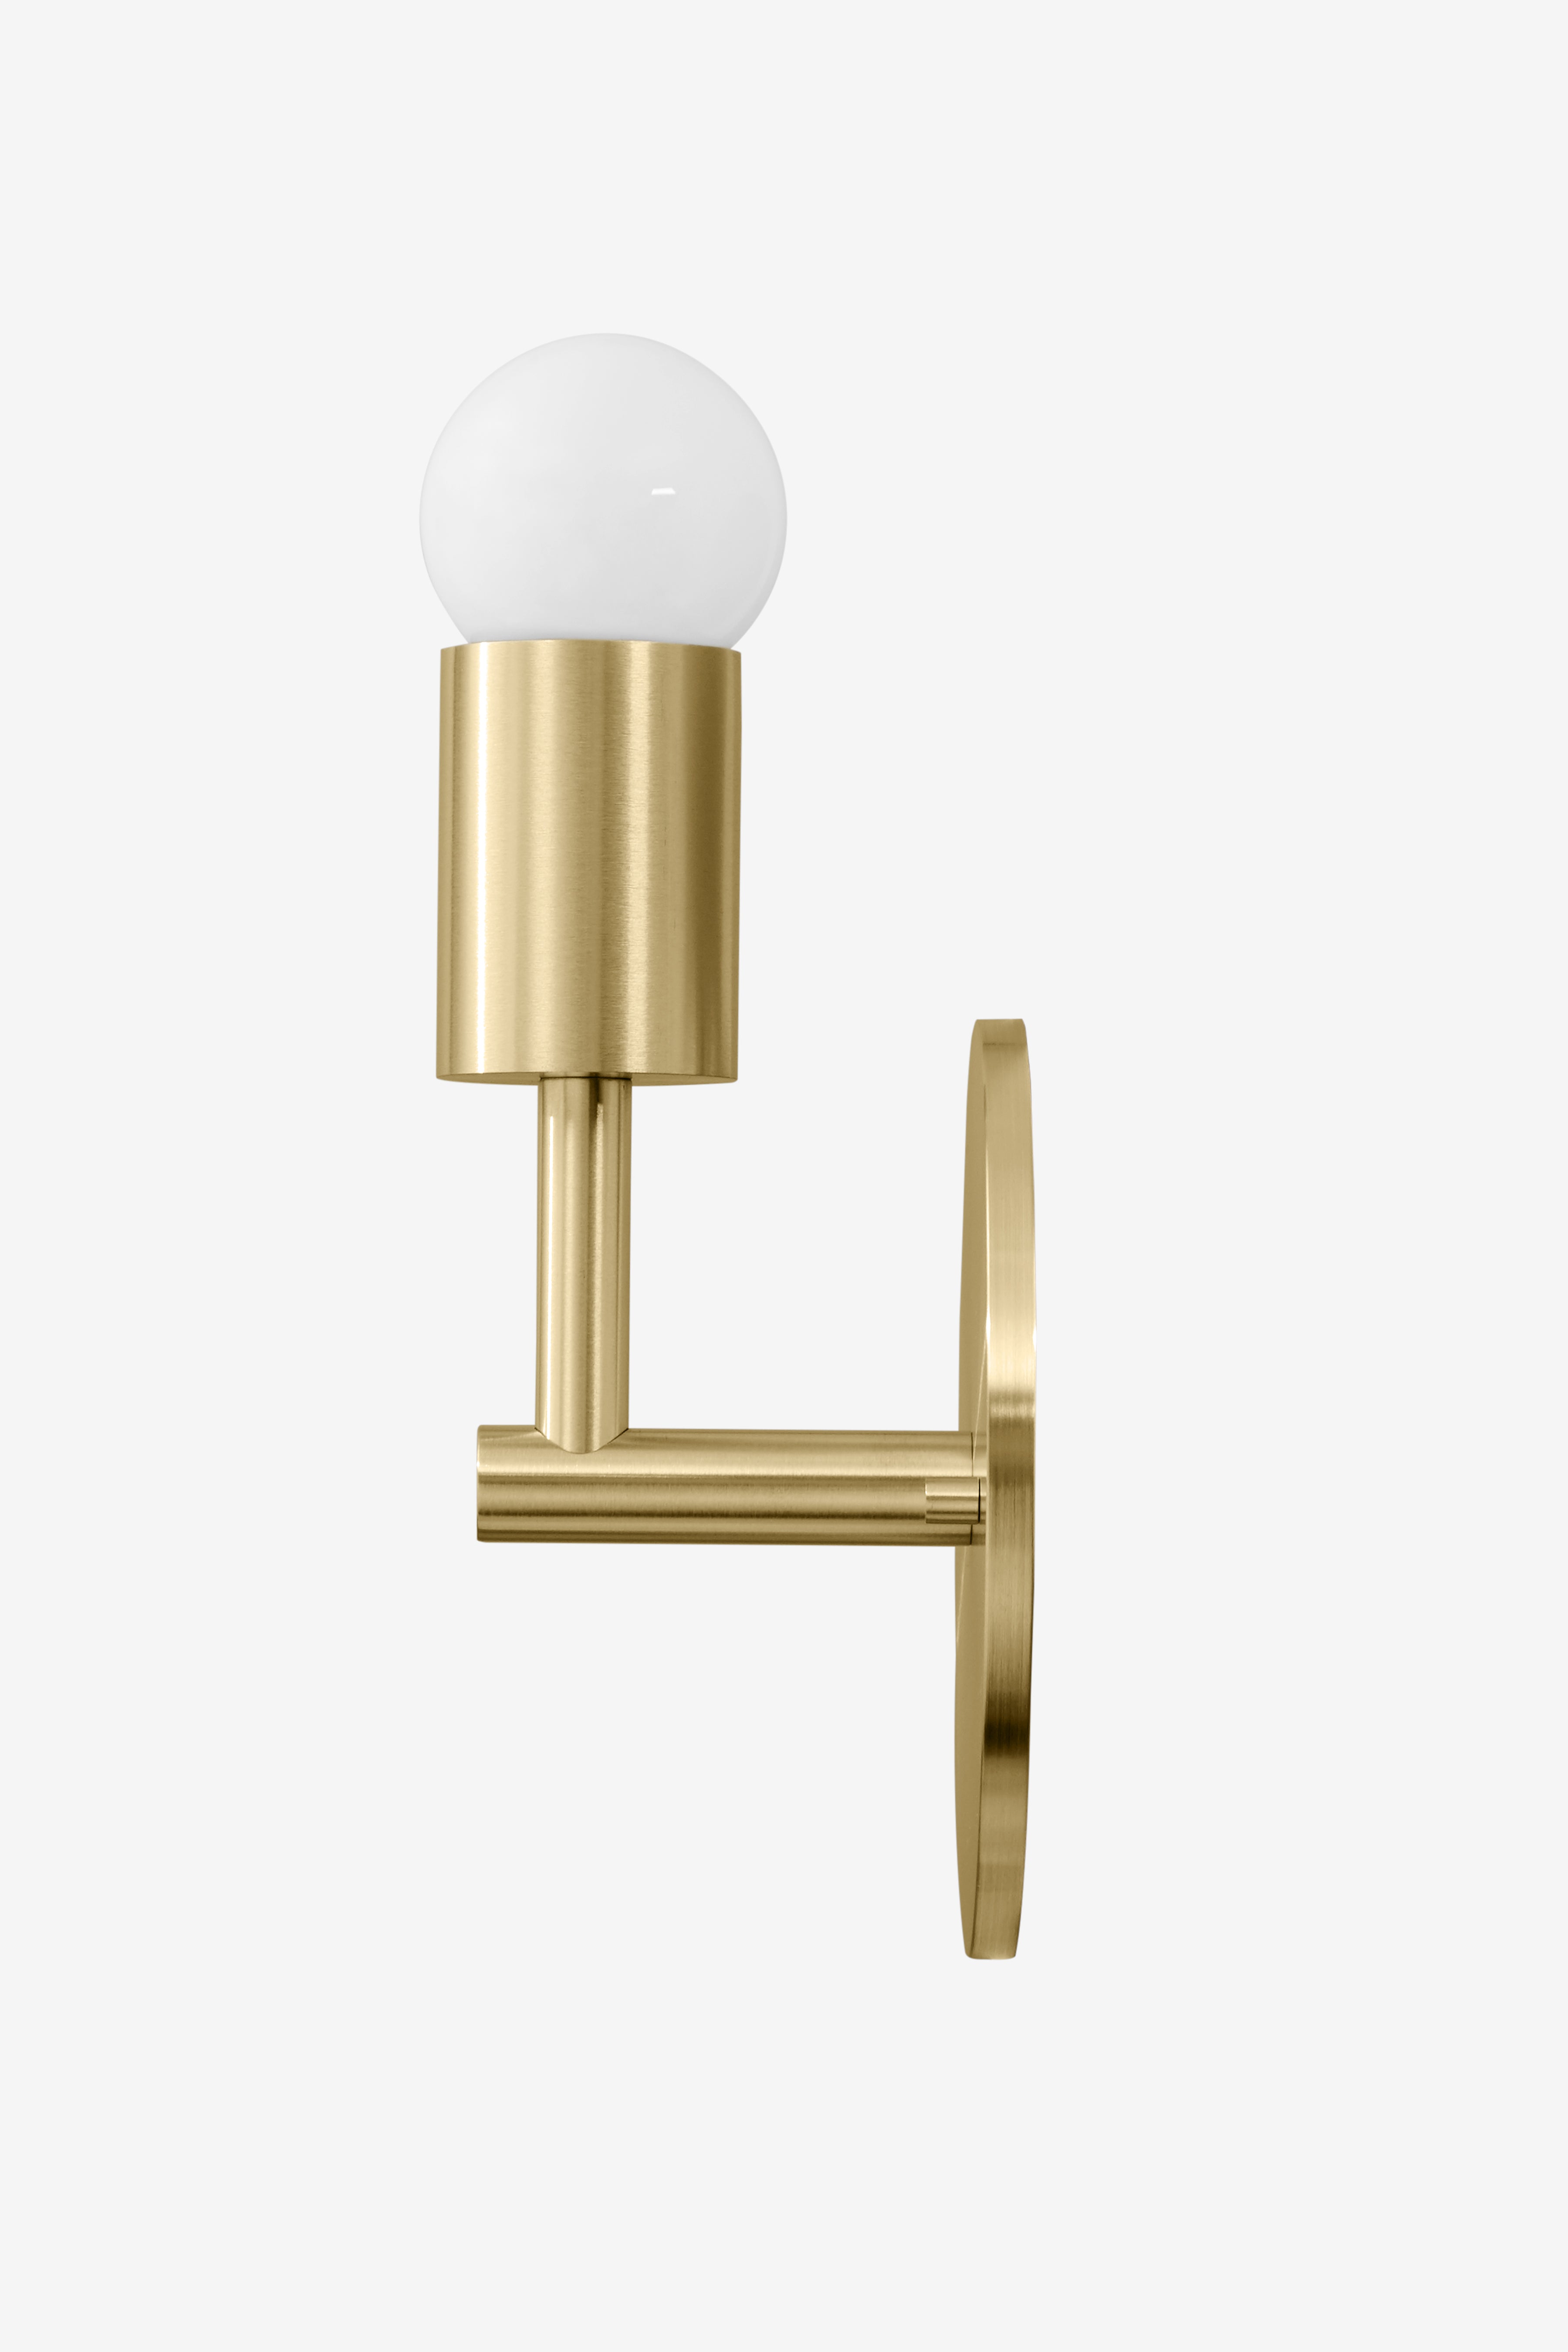 Afton Small / Sconce / Brass